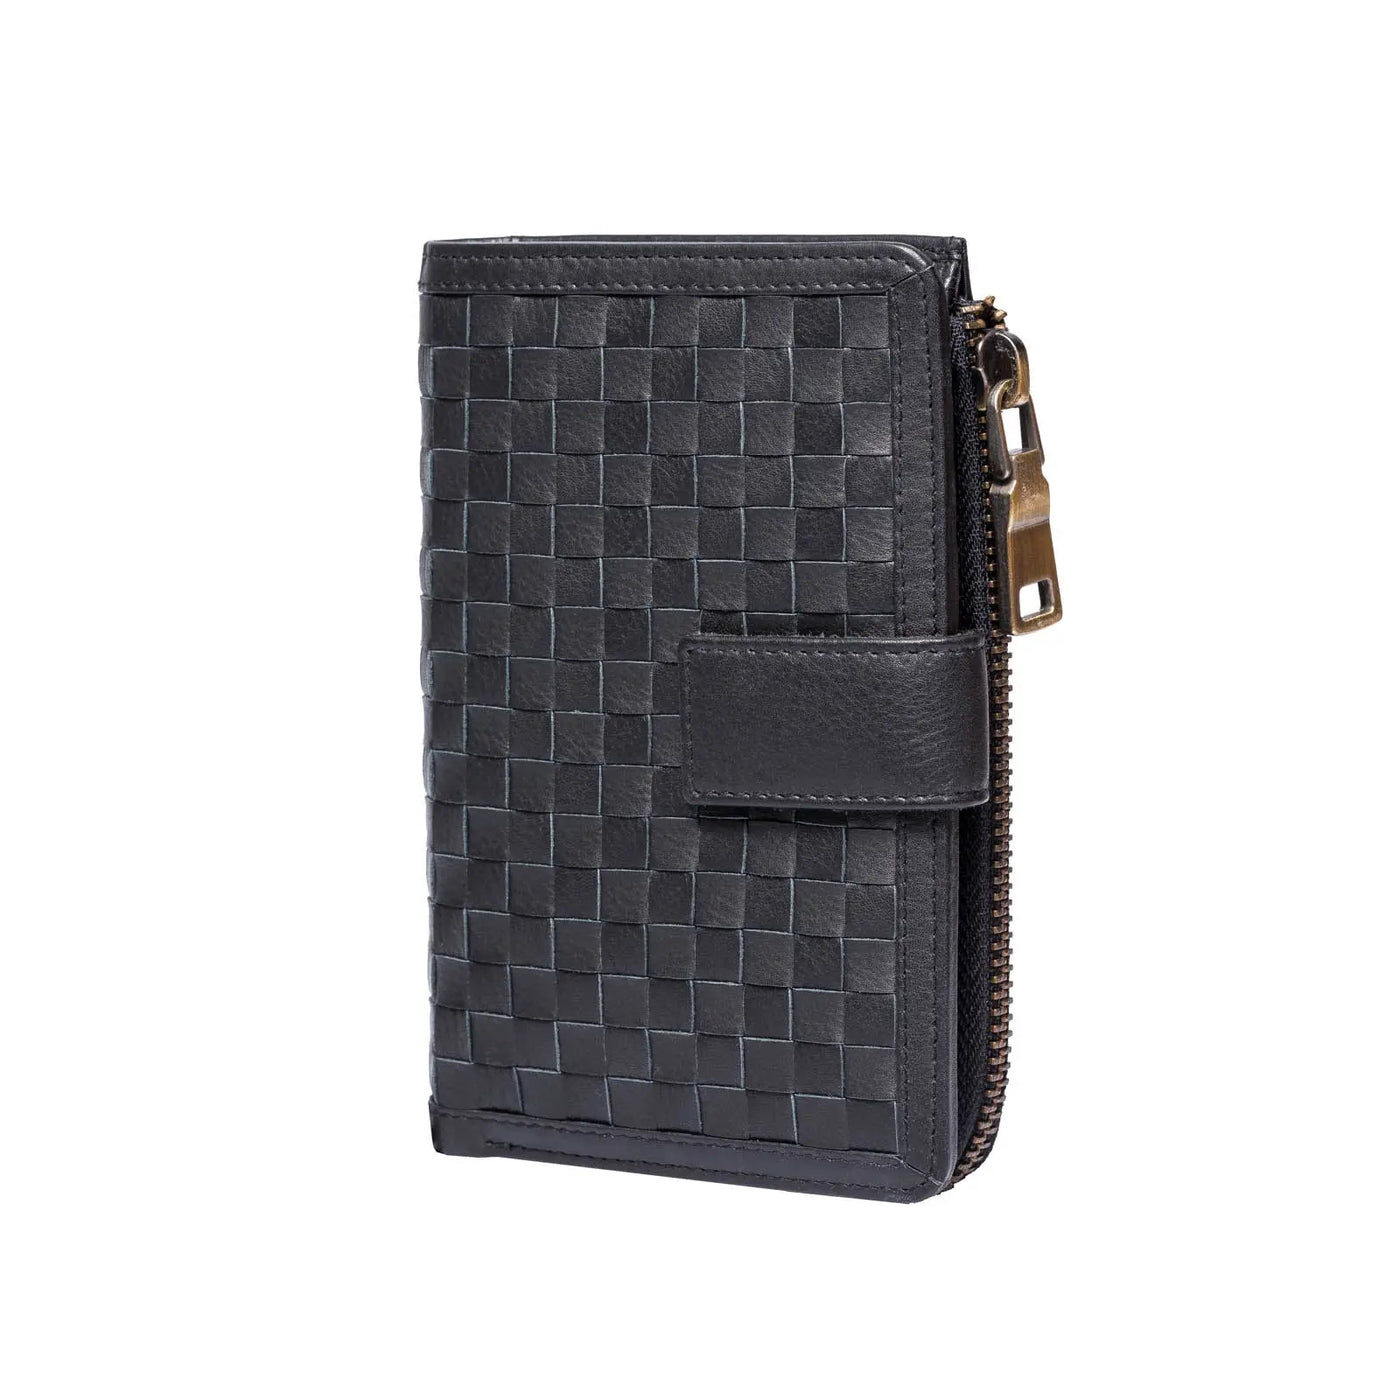 Nora supple leather wallet